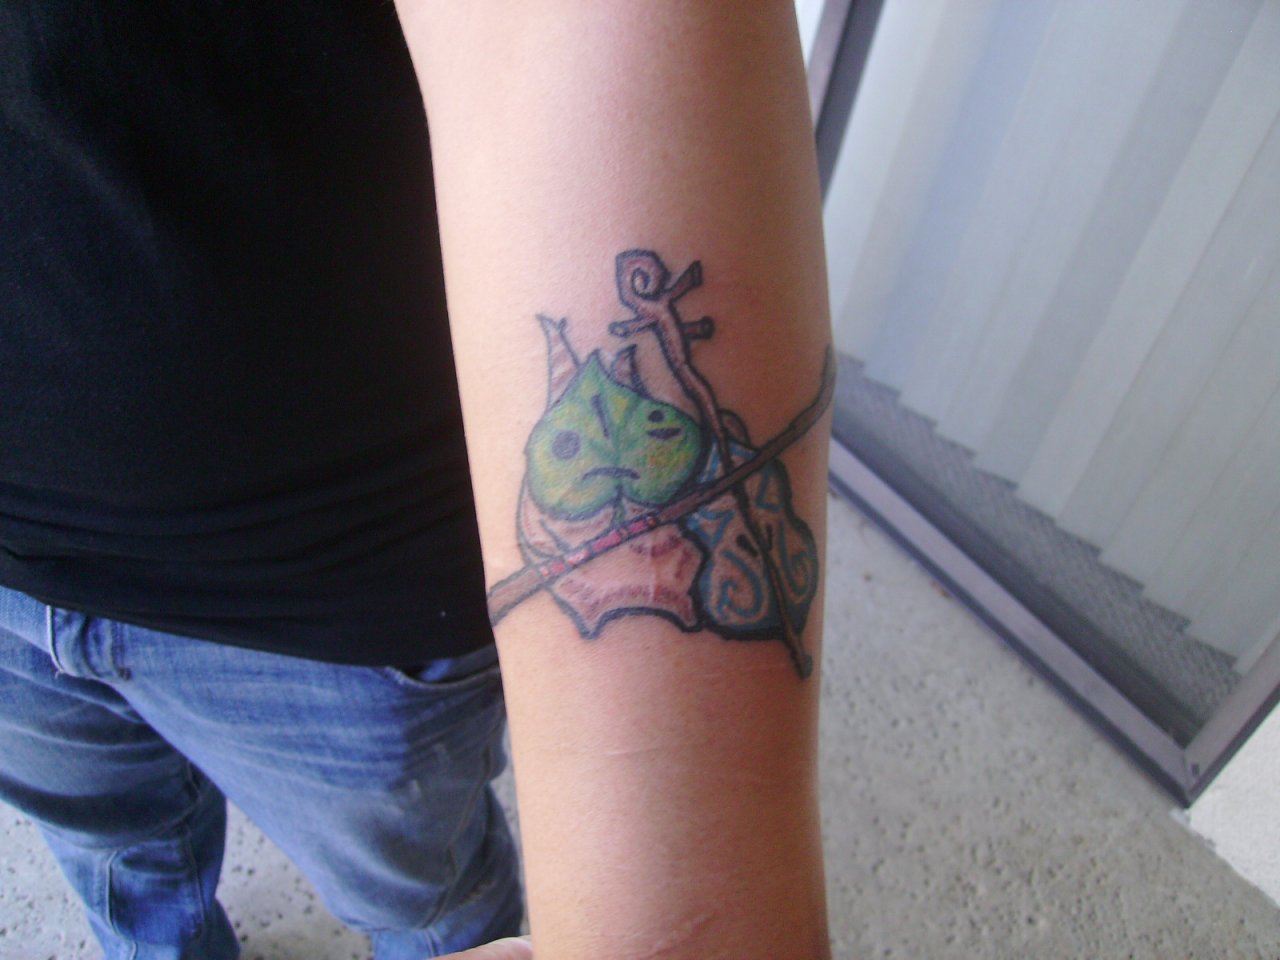 Muh baby sisters first tattoo!!